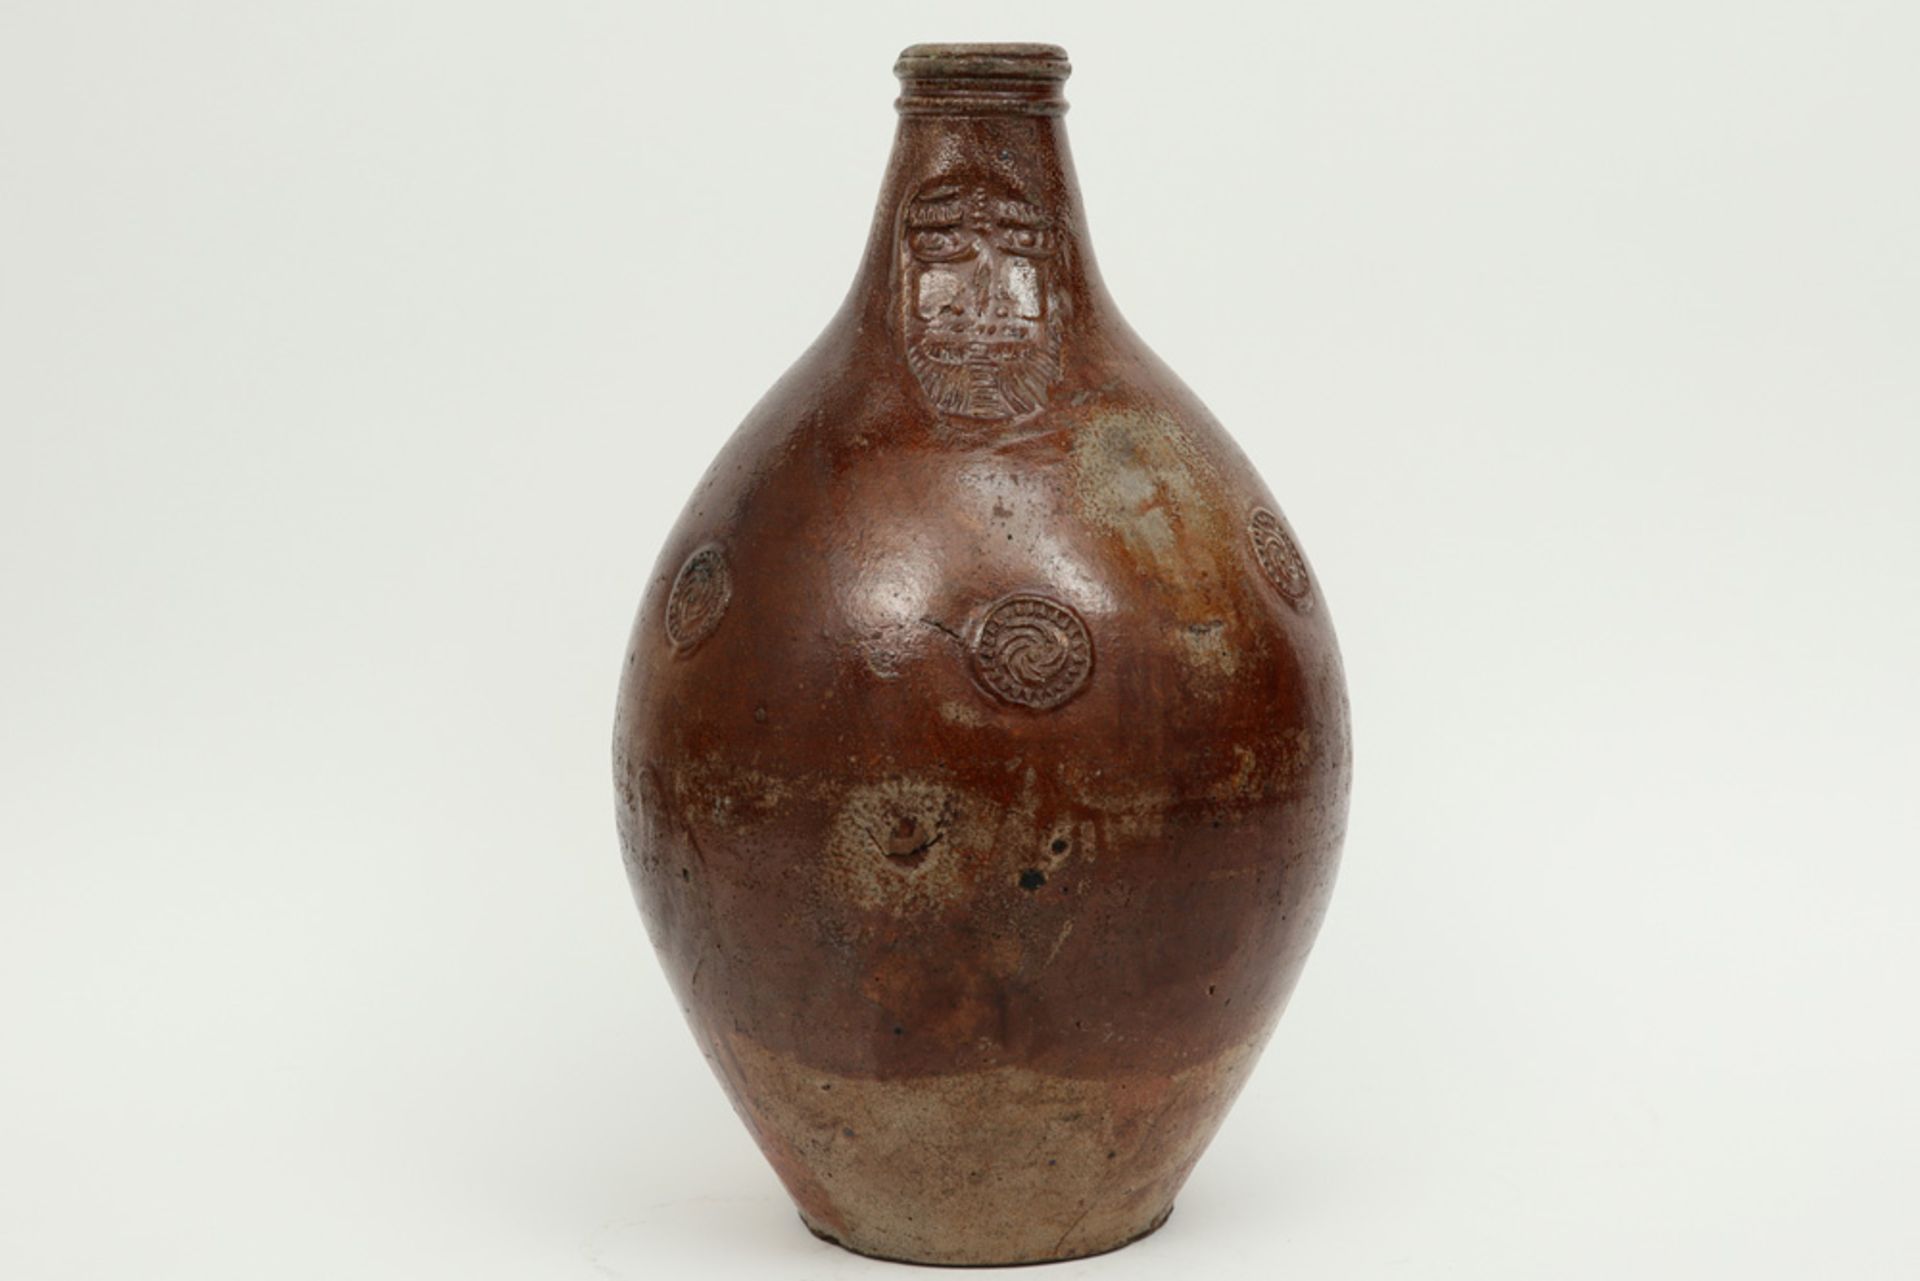 17th Cent. German pitcher, a Barthmann jar, in earthenware - Image 2 of 7